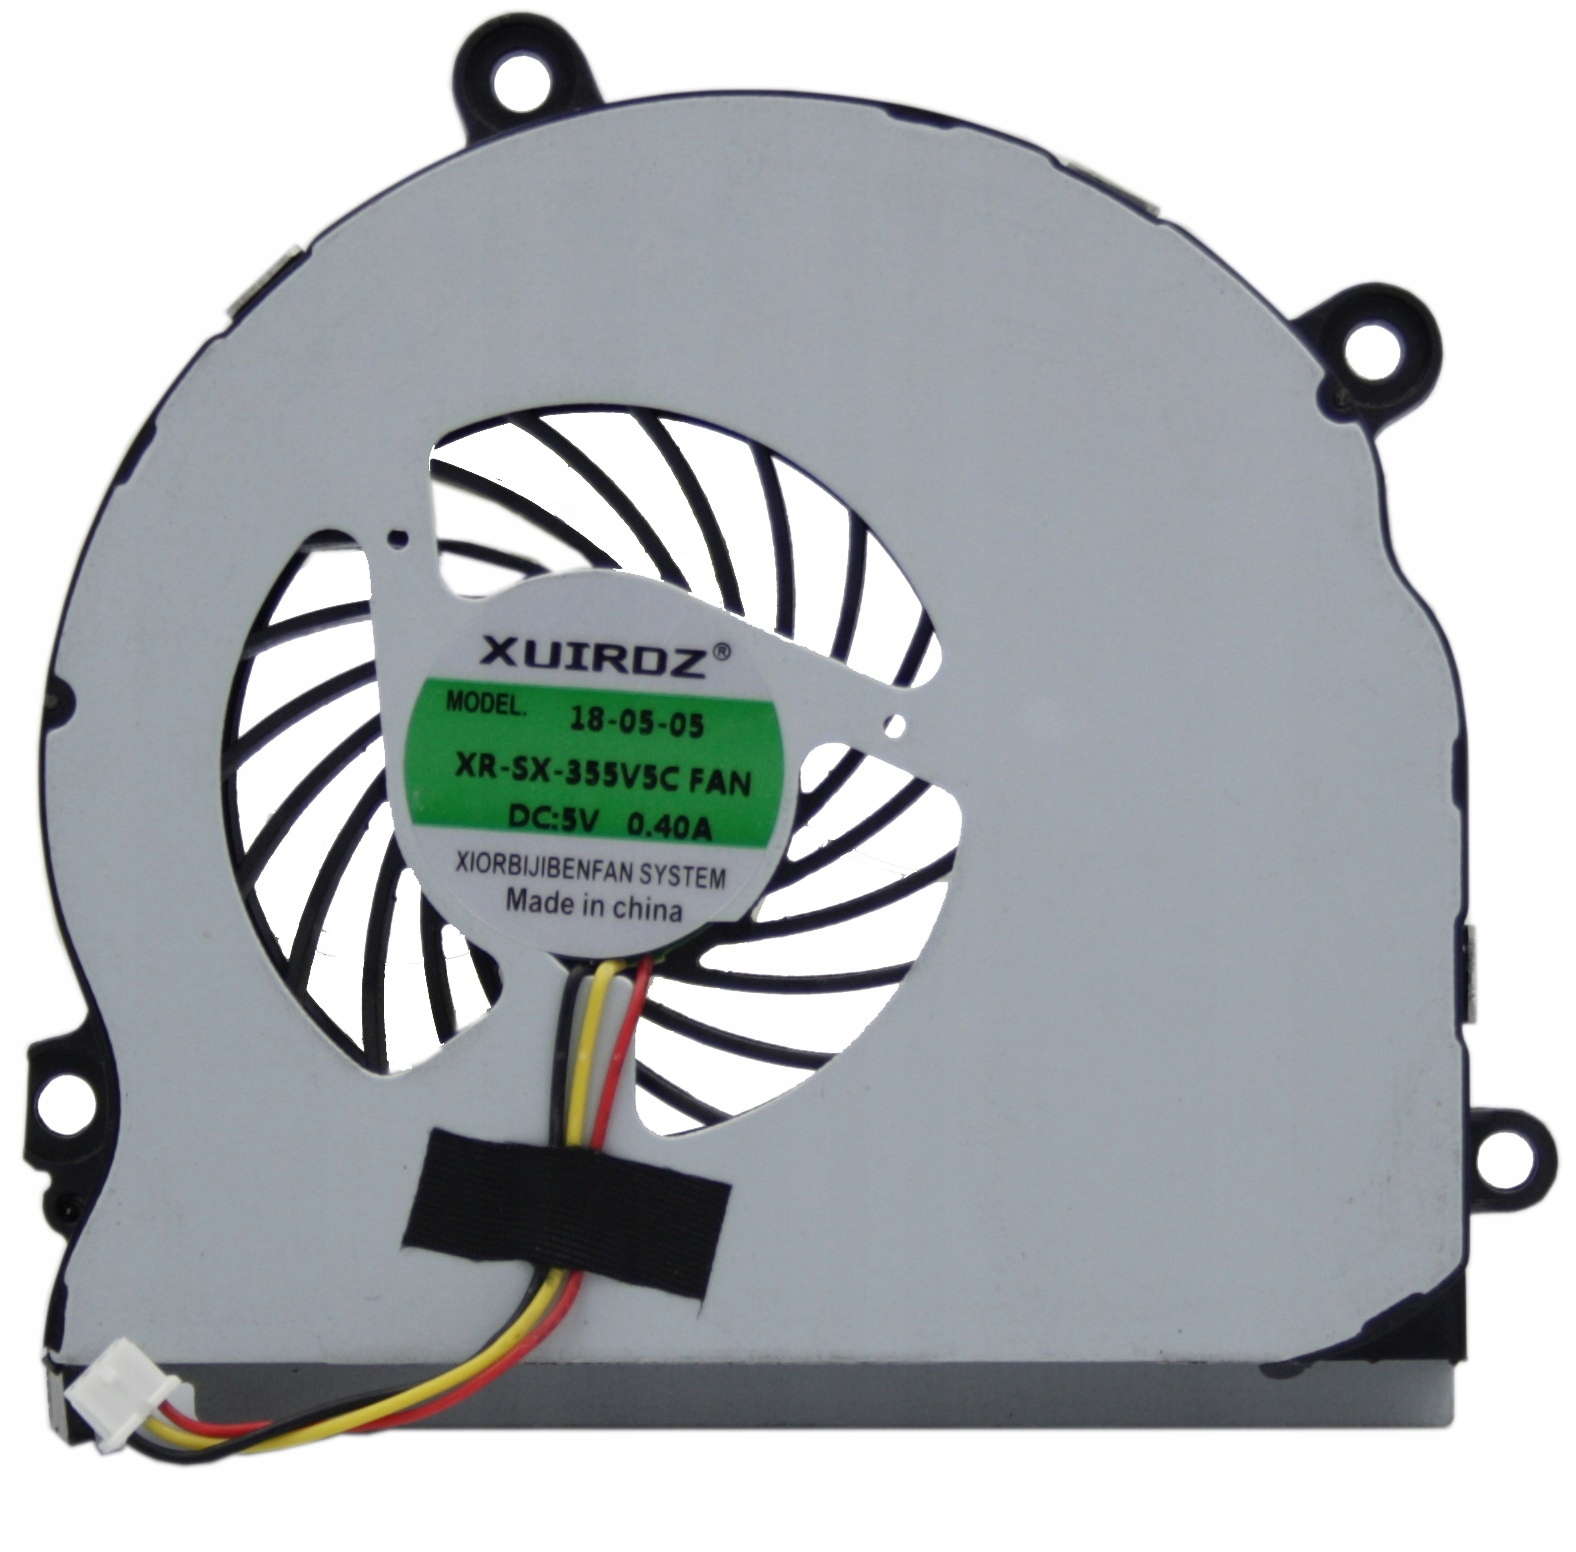 BA31-00132B New CPU Cooling Fan For Samsung NP350E7C NP355E5C NP355V5C NP350V5C NP355E7C NP365E5C P/N:BA31-00132C DC28000BMS0 BA31-00132A 